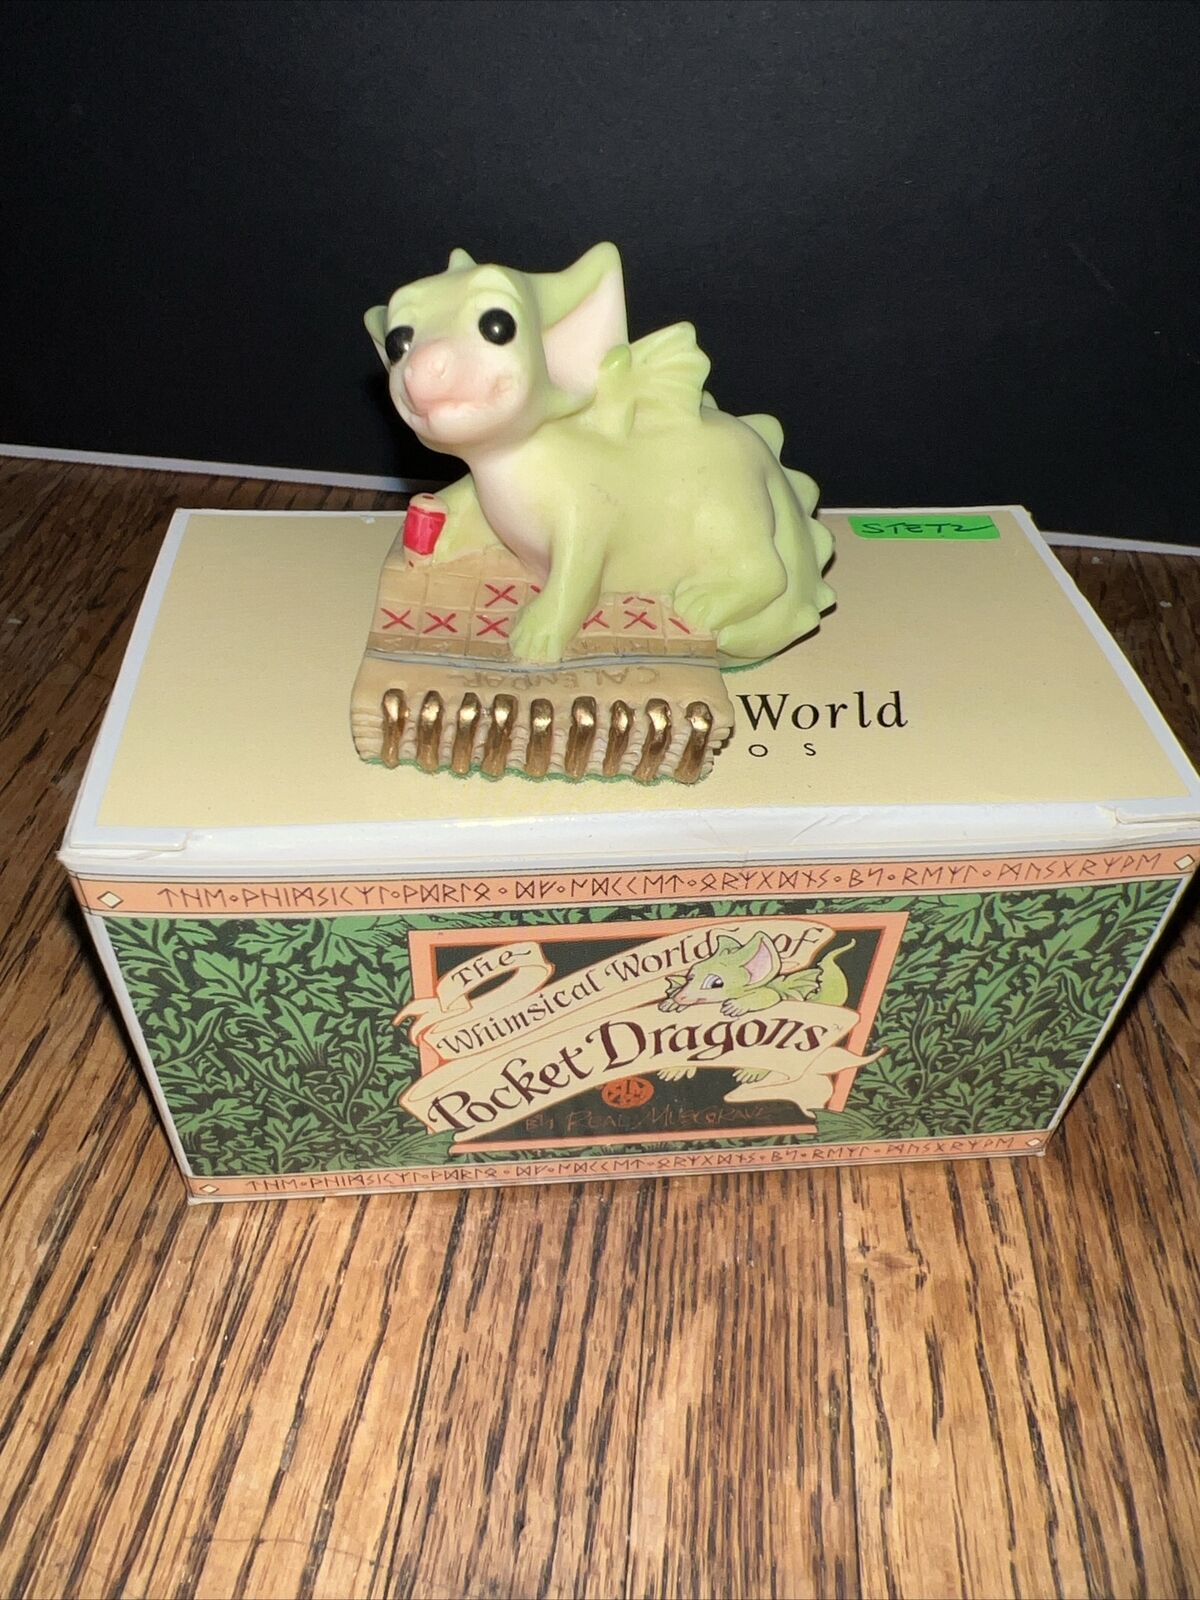 SIGNED 1999 Whimsical World Pocket Dragons ‘Counting The Days’ Musgrave Box